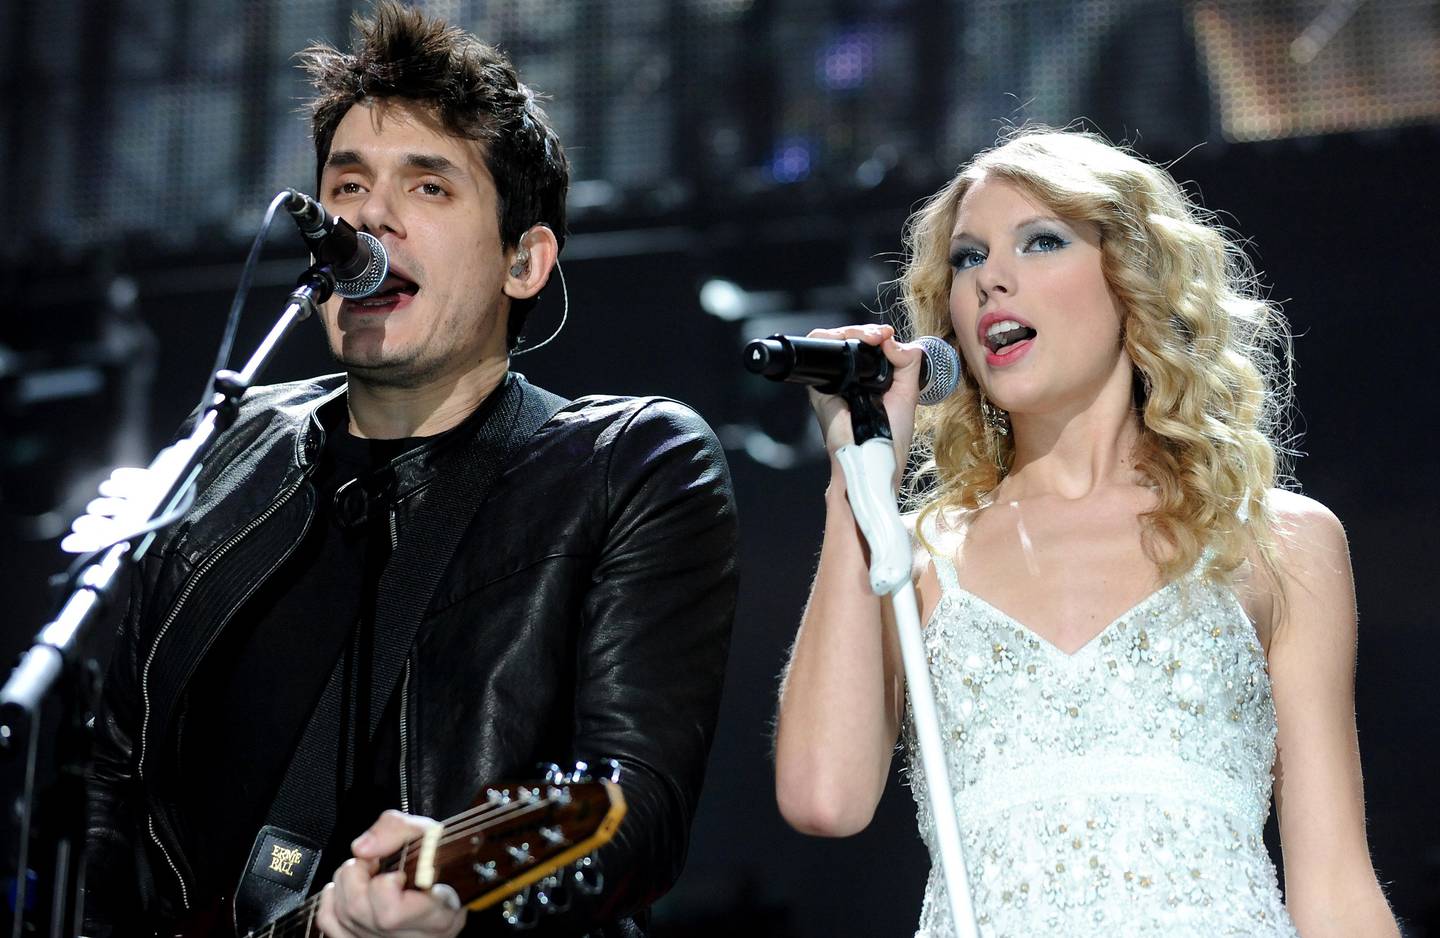 Musician John Mayer and singer Taylor Swift perform together at the 2009 Z100 Jingle Ball at Madison Square Garden in New York on Friday, Dec. 11, 2009. (AP Photo/Evan Agostini)